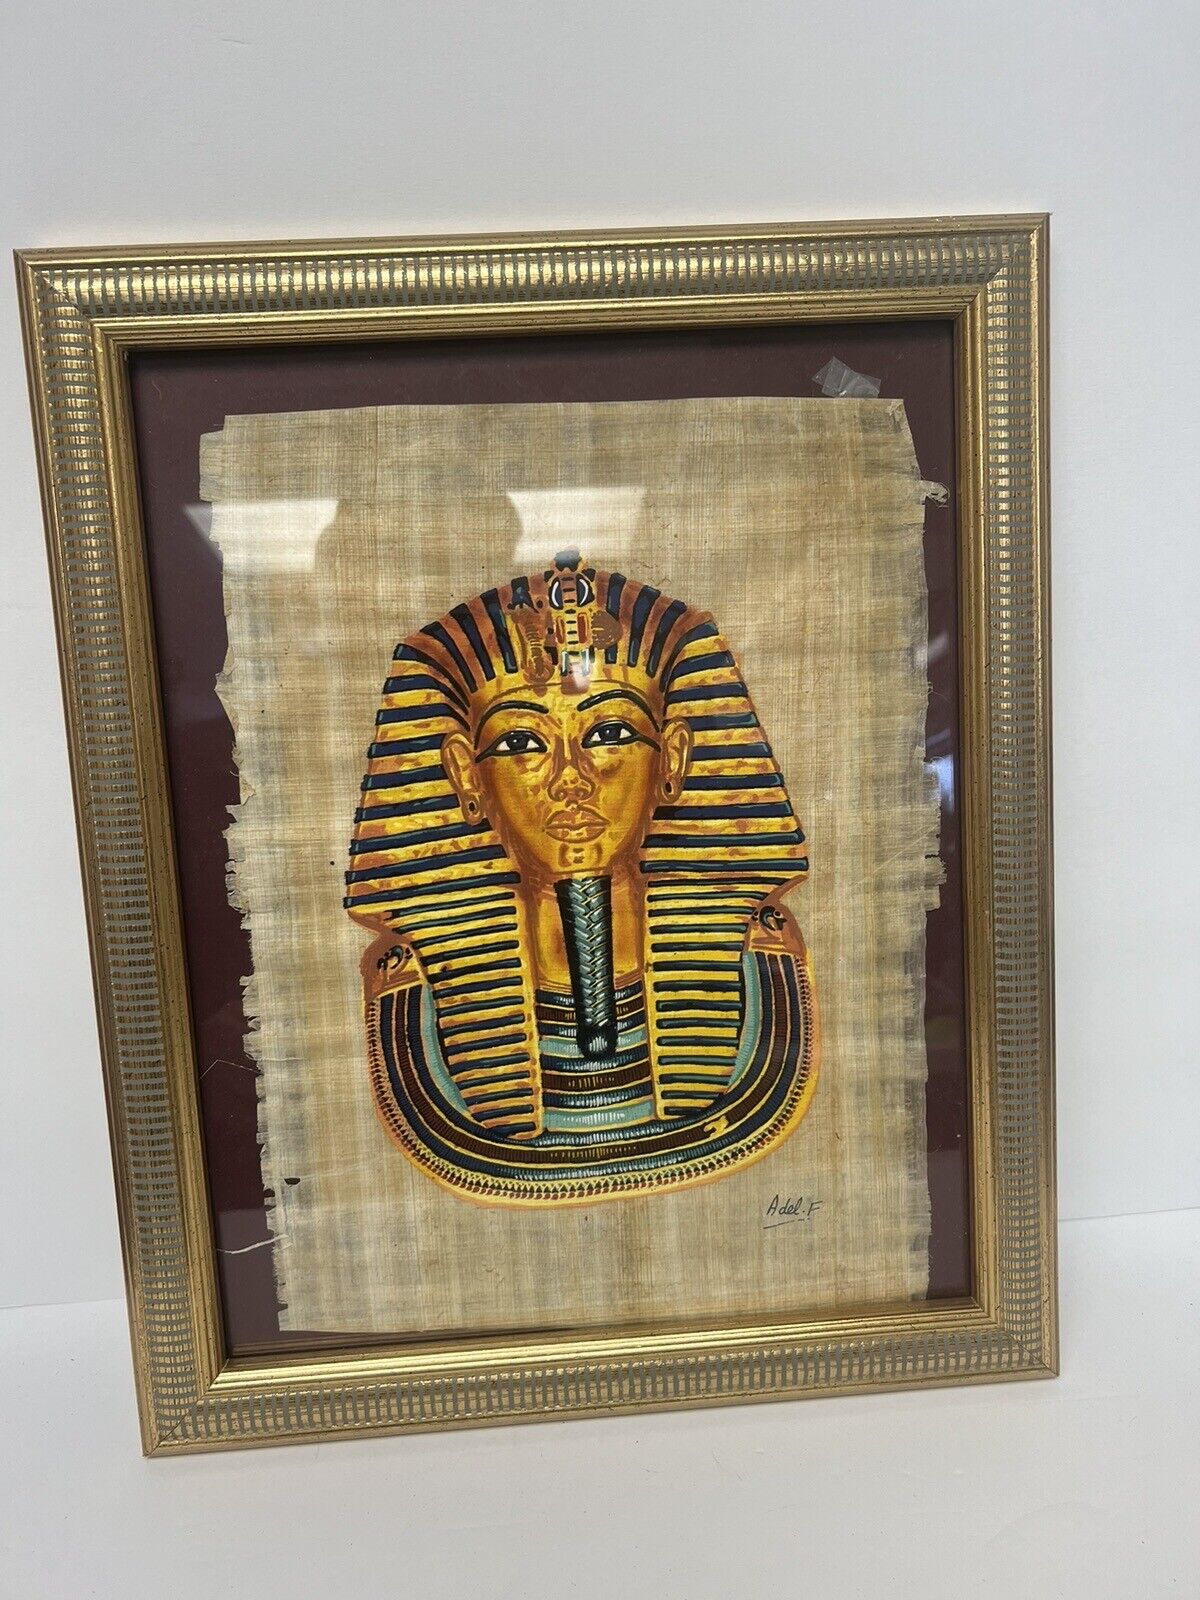 Papyrus Gallery Papyrus Plant Painting Art, Framed, King Tut, Signed